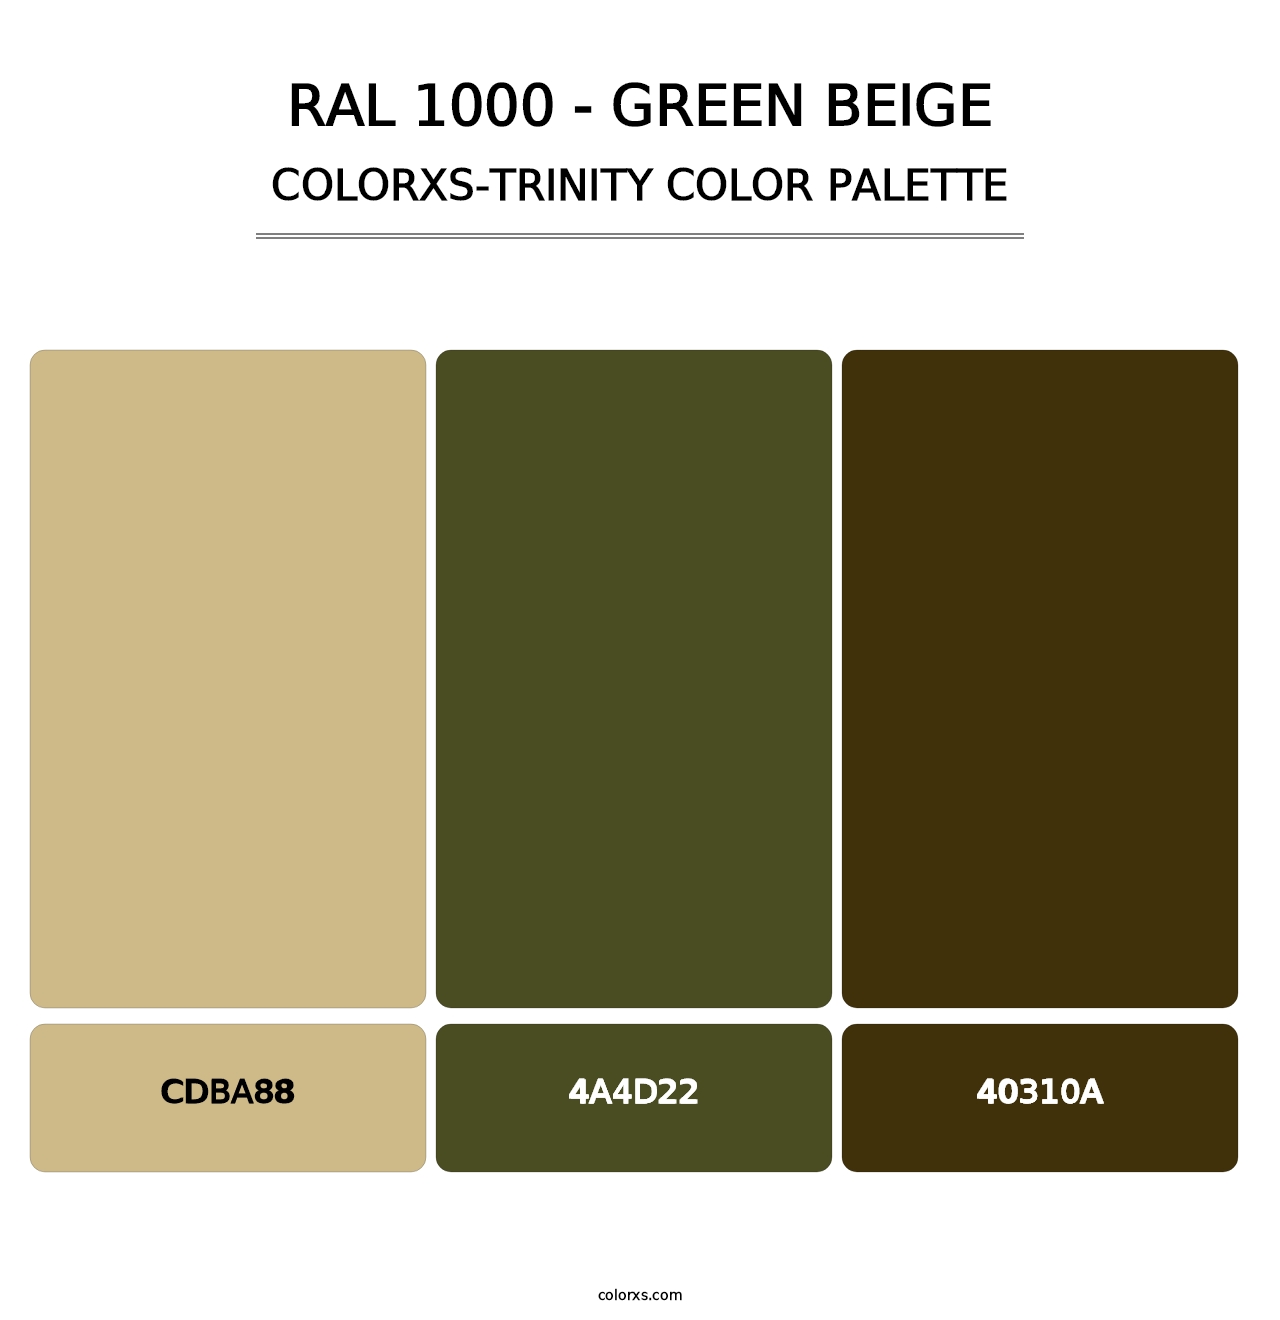 RAL 1000 - Green Beige - Colorxs Trinity Palette